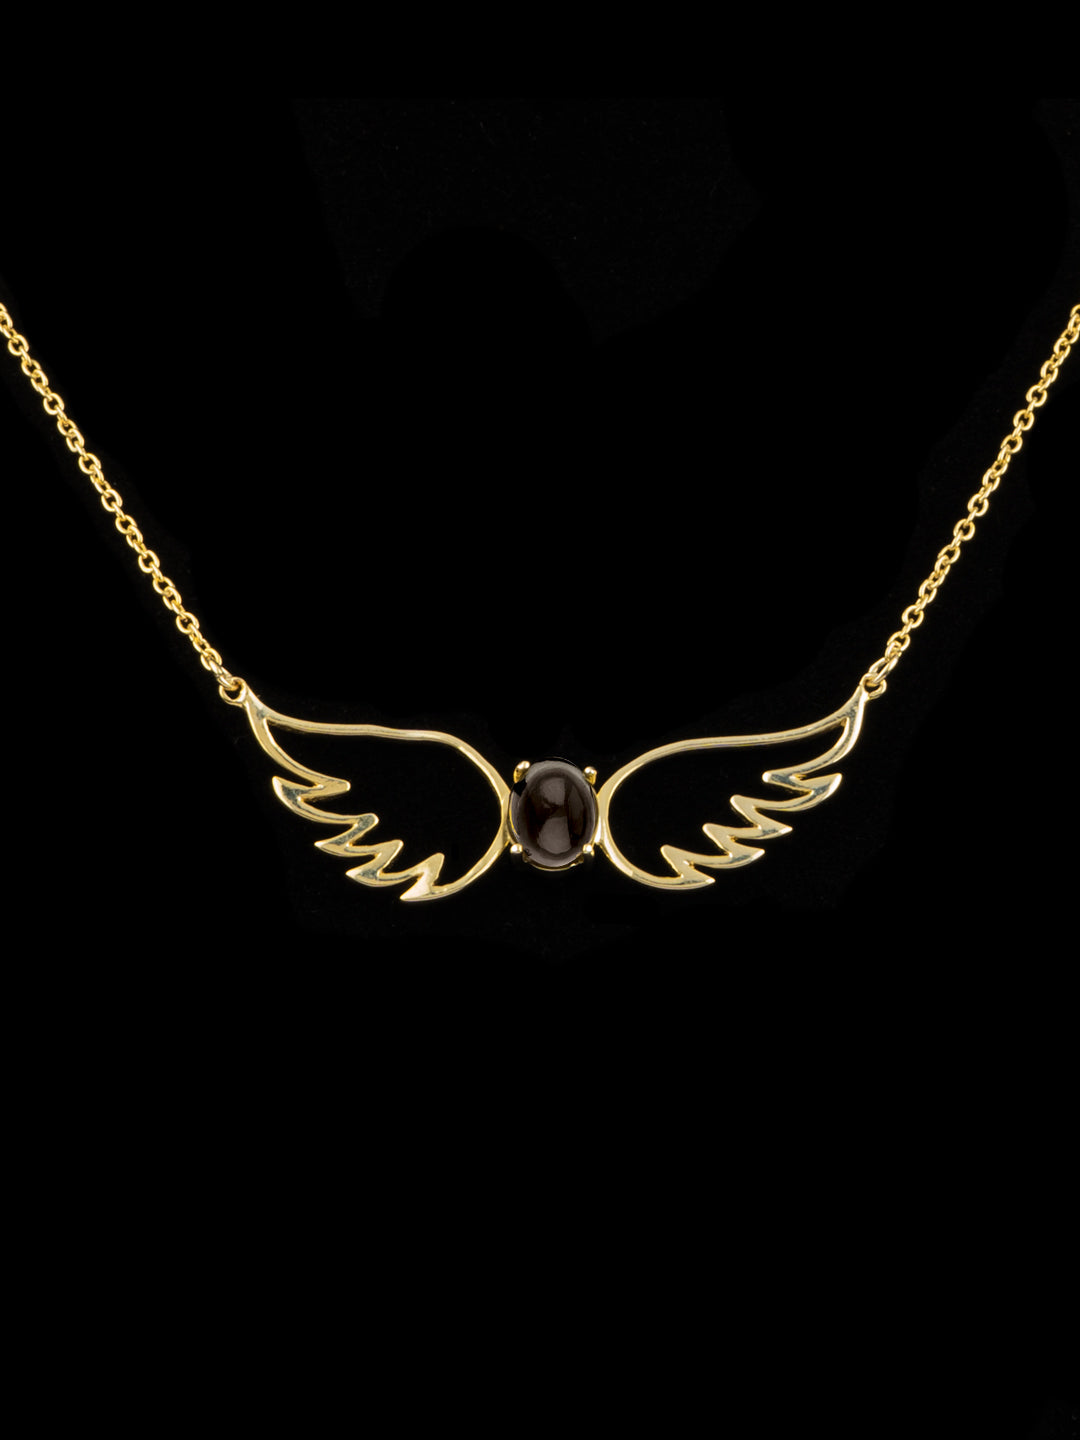 Dual Feather Black Onyx Gold Plated Necklace